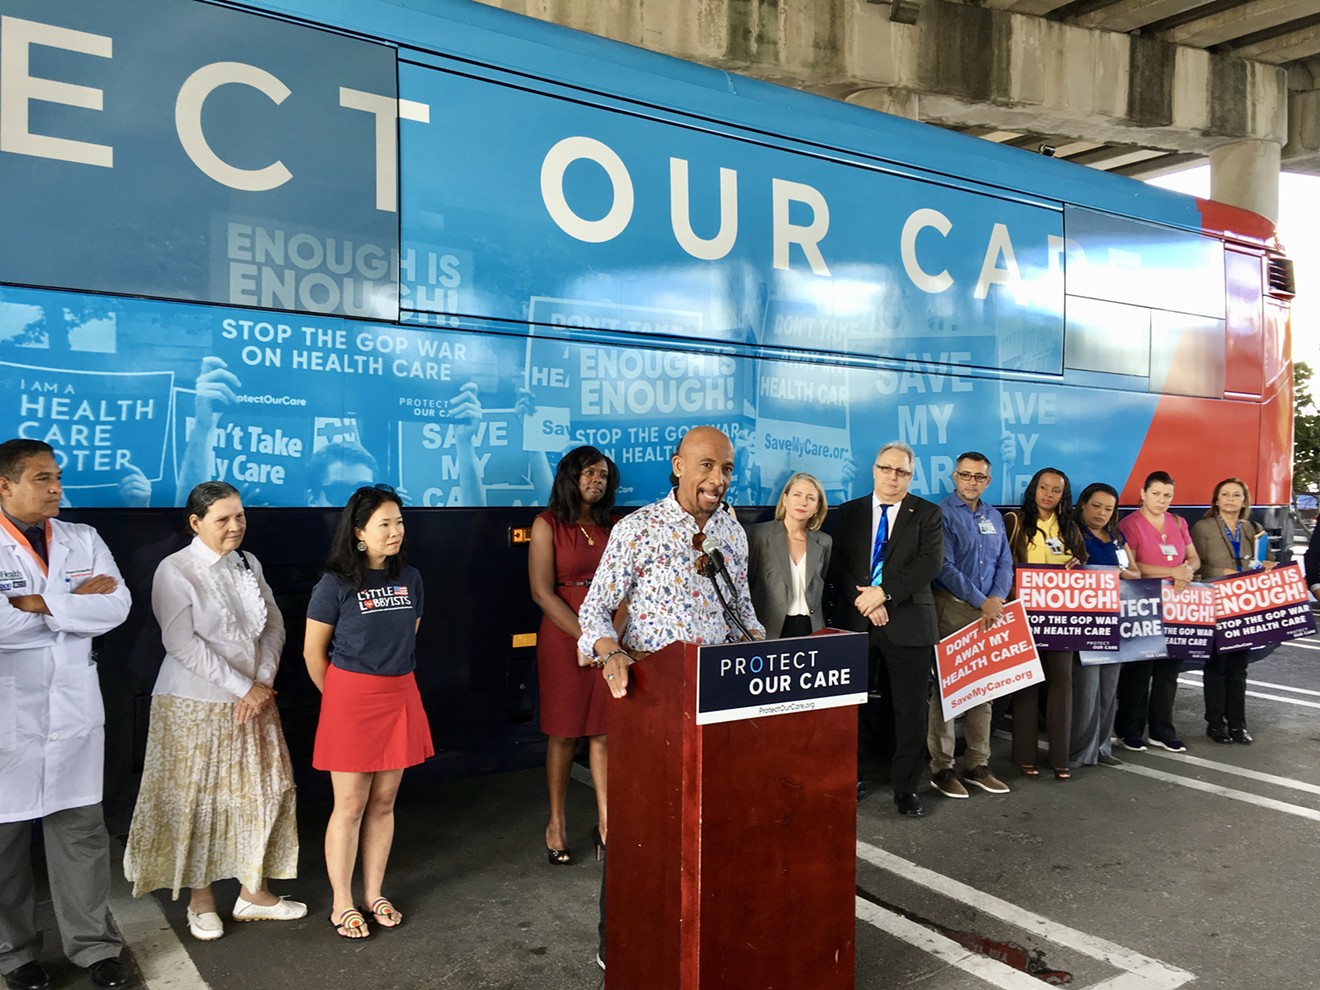 Montel Williams speaks at a Protect Our Care bus event in Miami, along with congressional candidate Mary Barzee Flores, healthcare advocates, and patients.